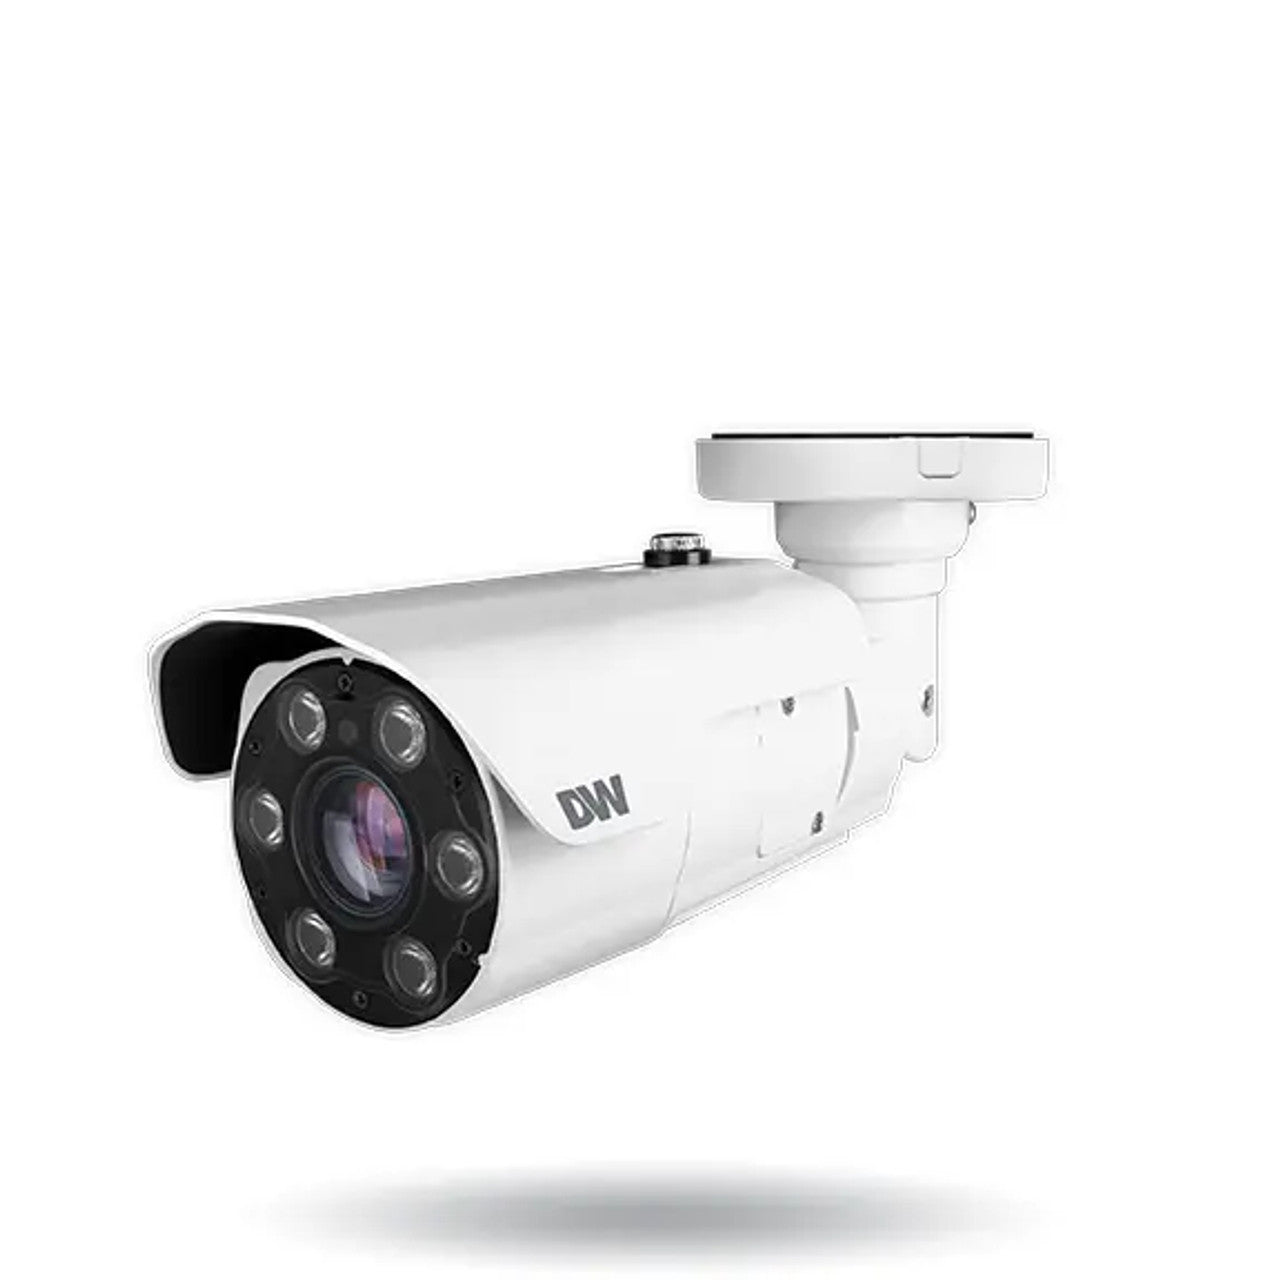 Digital Watchdog DWC-MPB48WiATW 8MP 4K Night Vision Outdoor Bullet IP Security Camera with IVA Plus